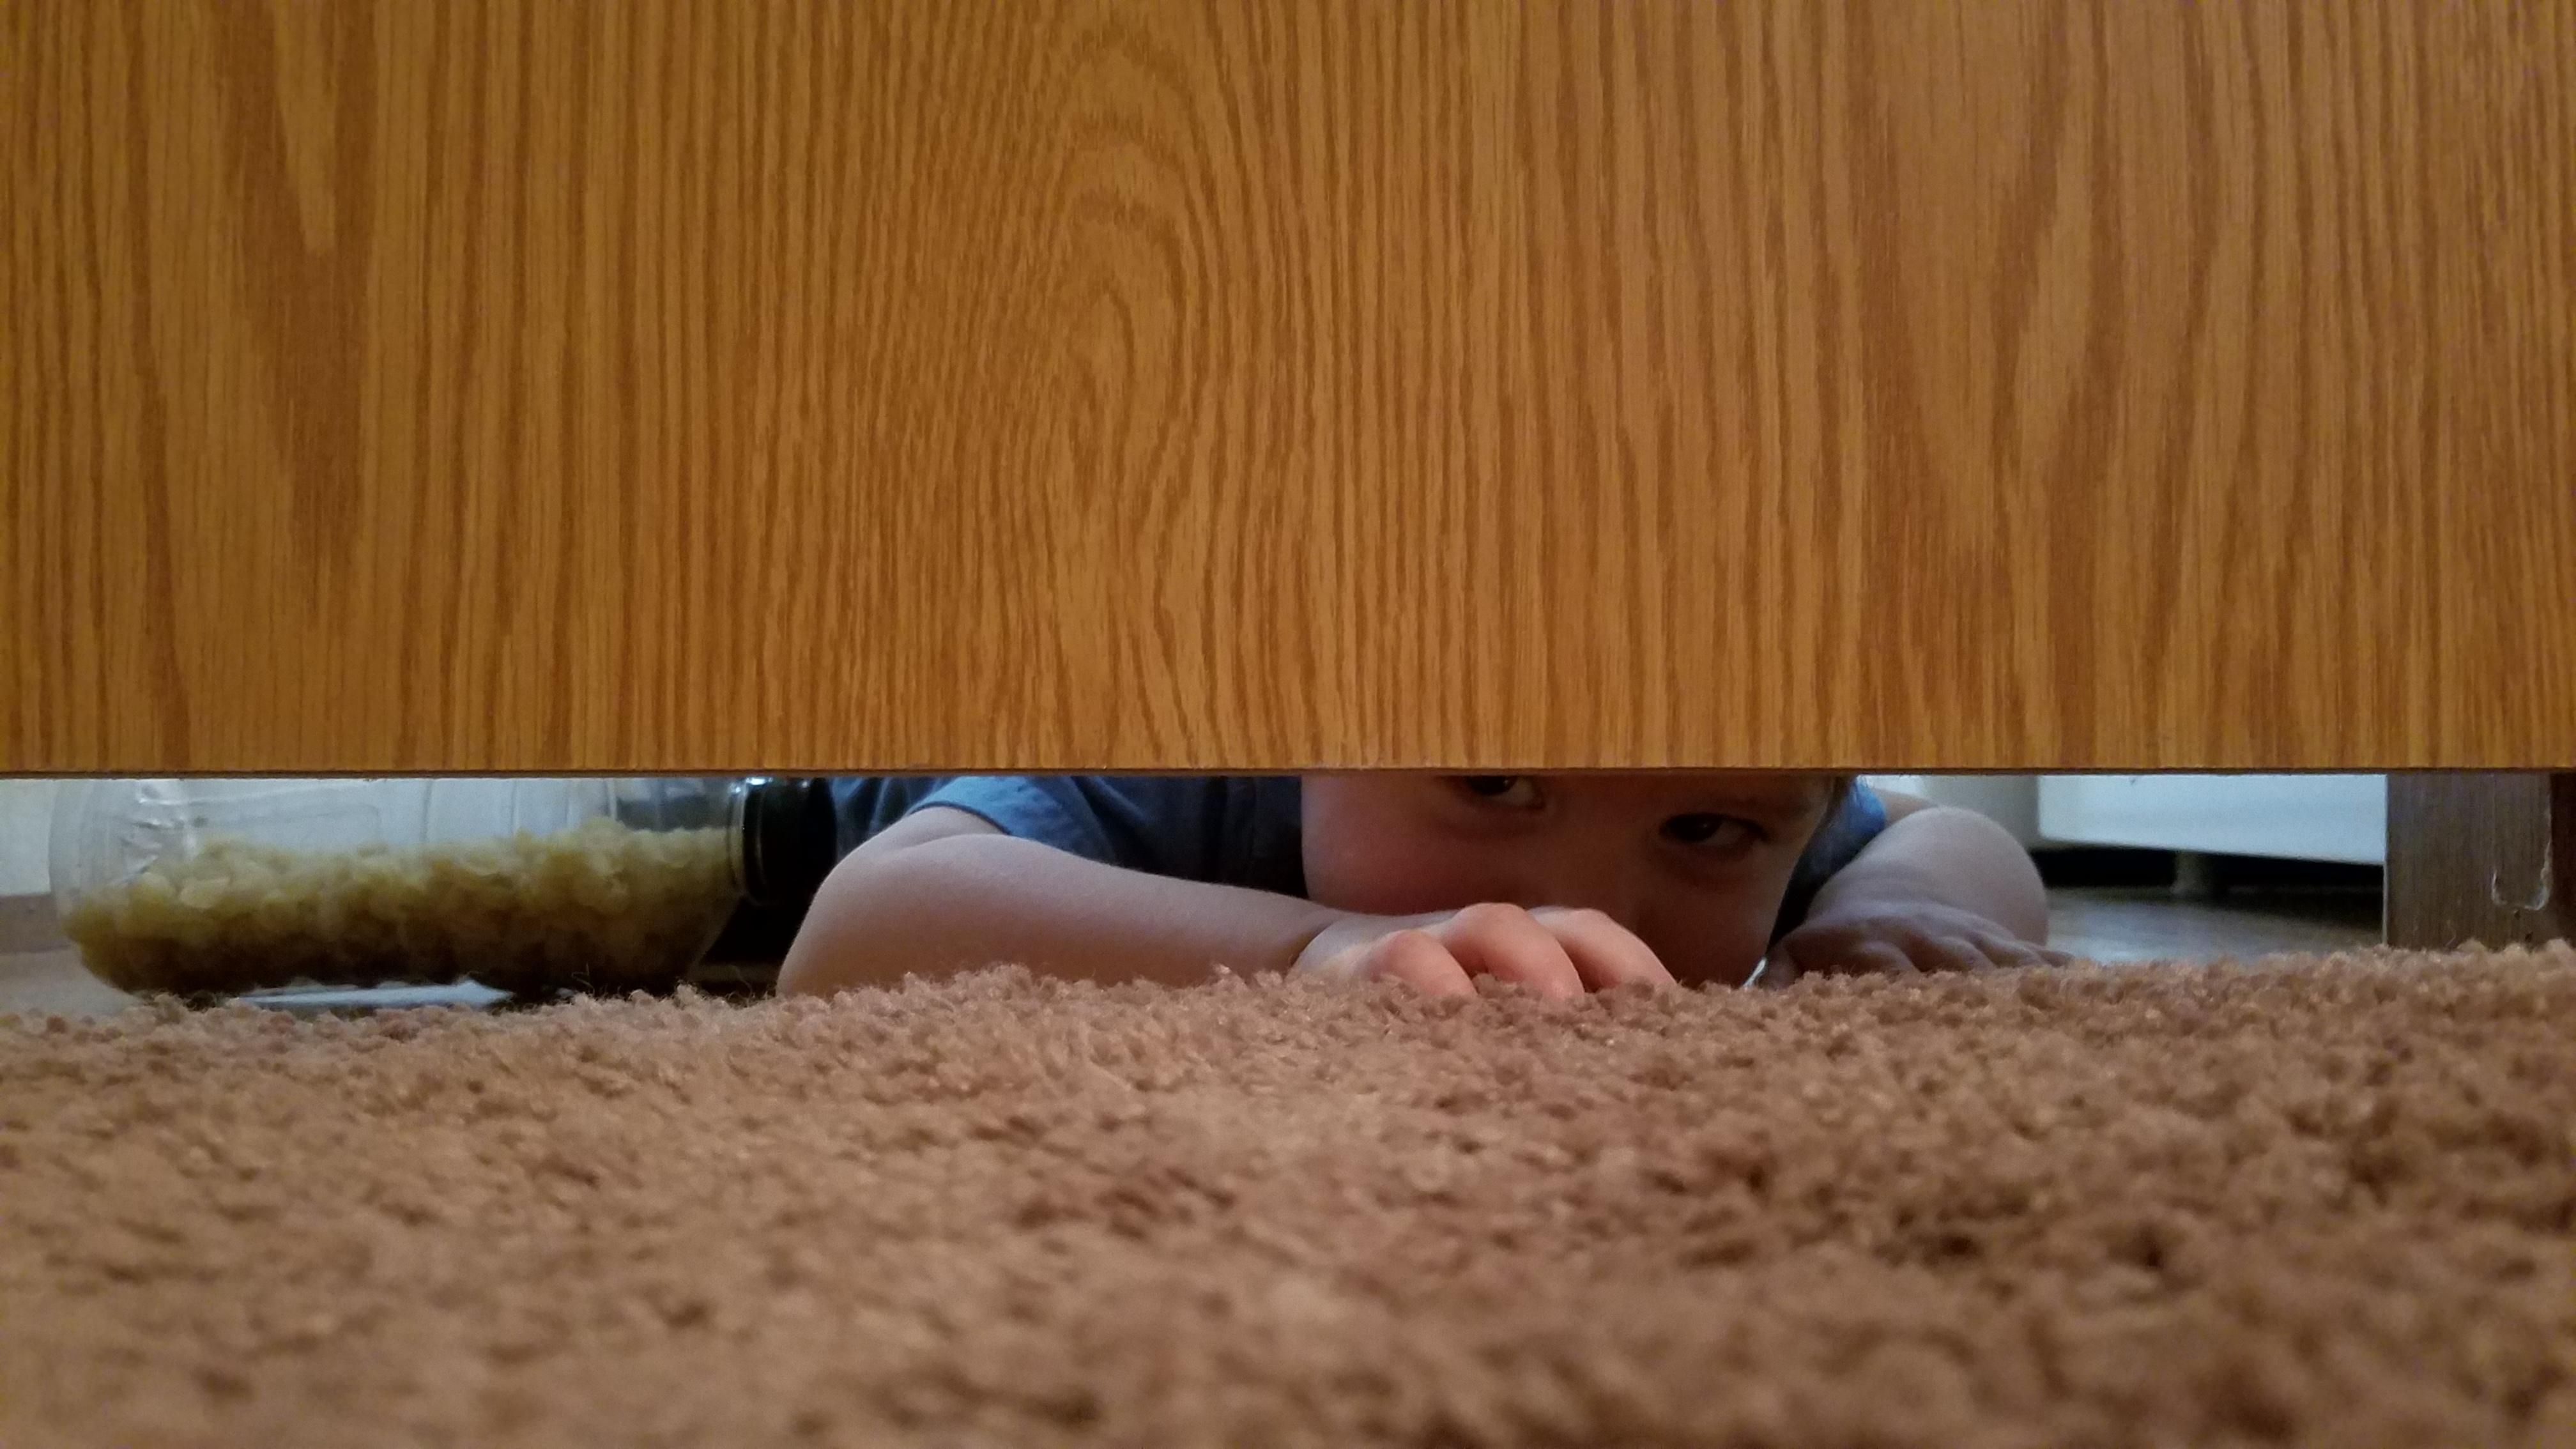 When you have a 1 year old and go in the other room